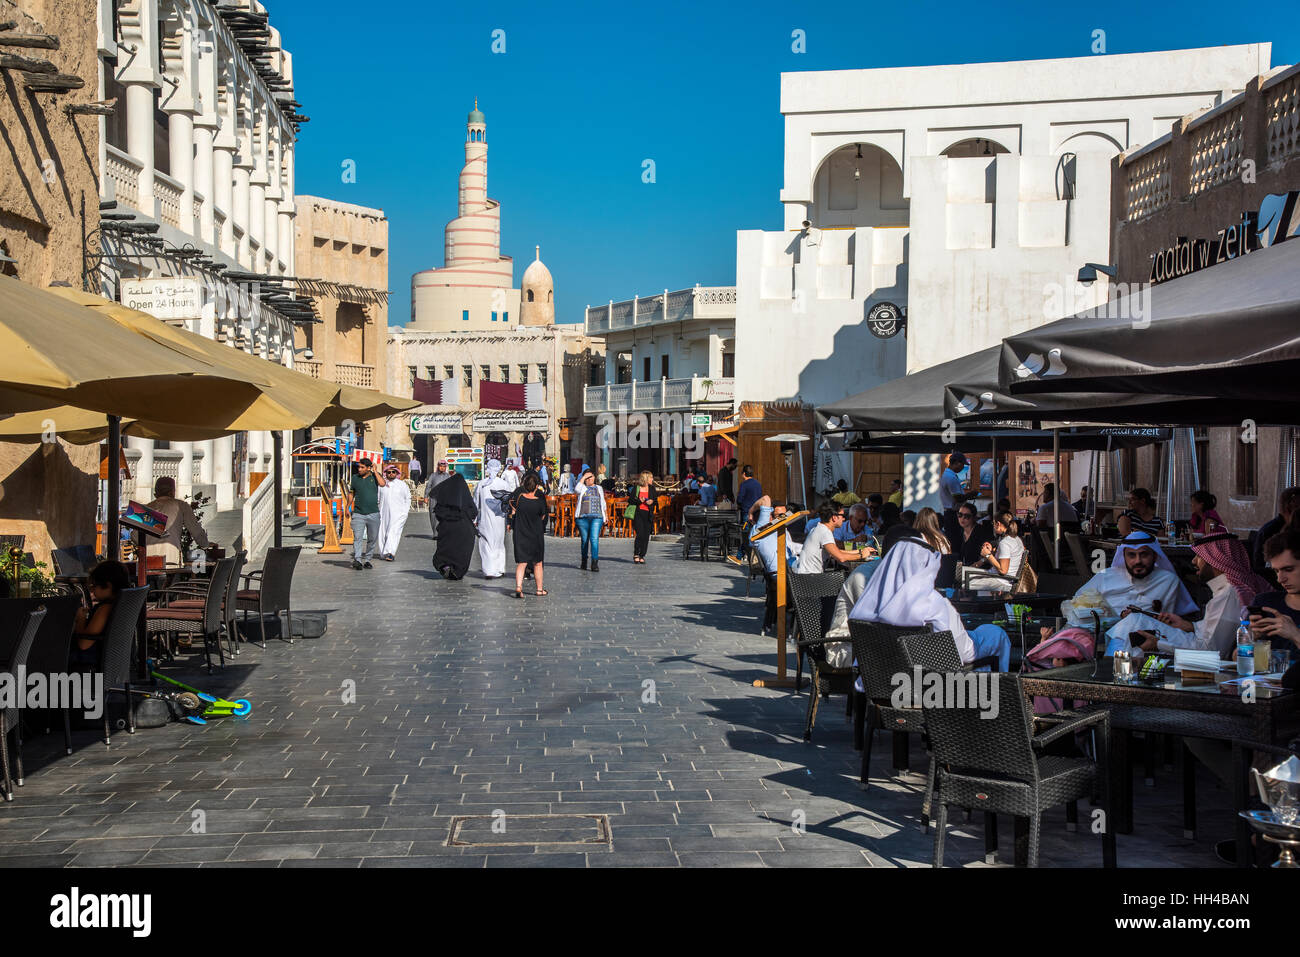 Day view over the pedestrian mall of Souq Waqif area, Doha, Qatar Stock Photo